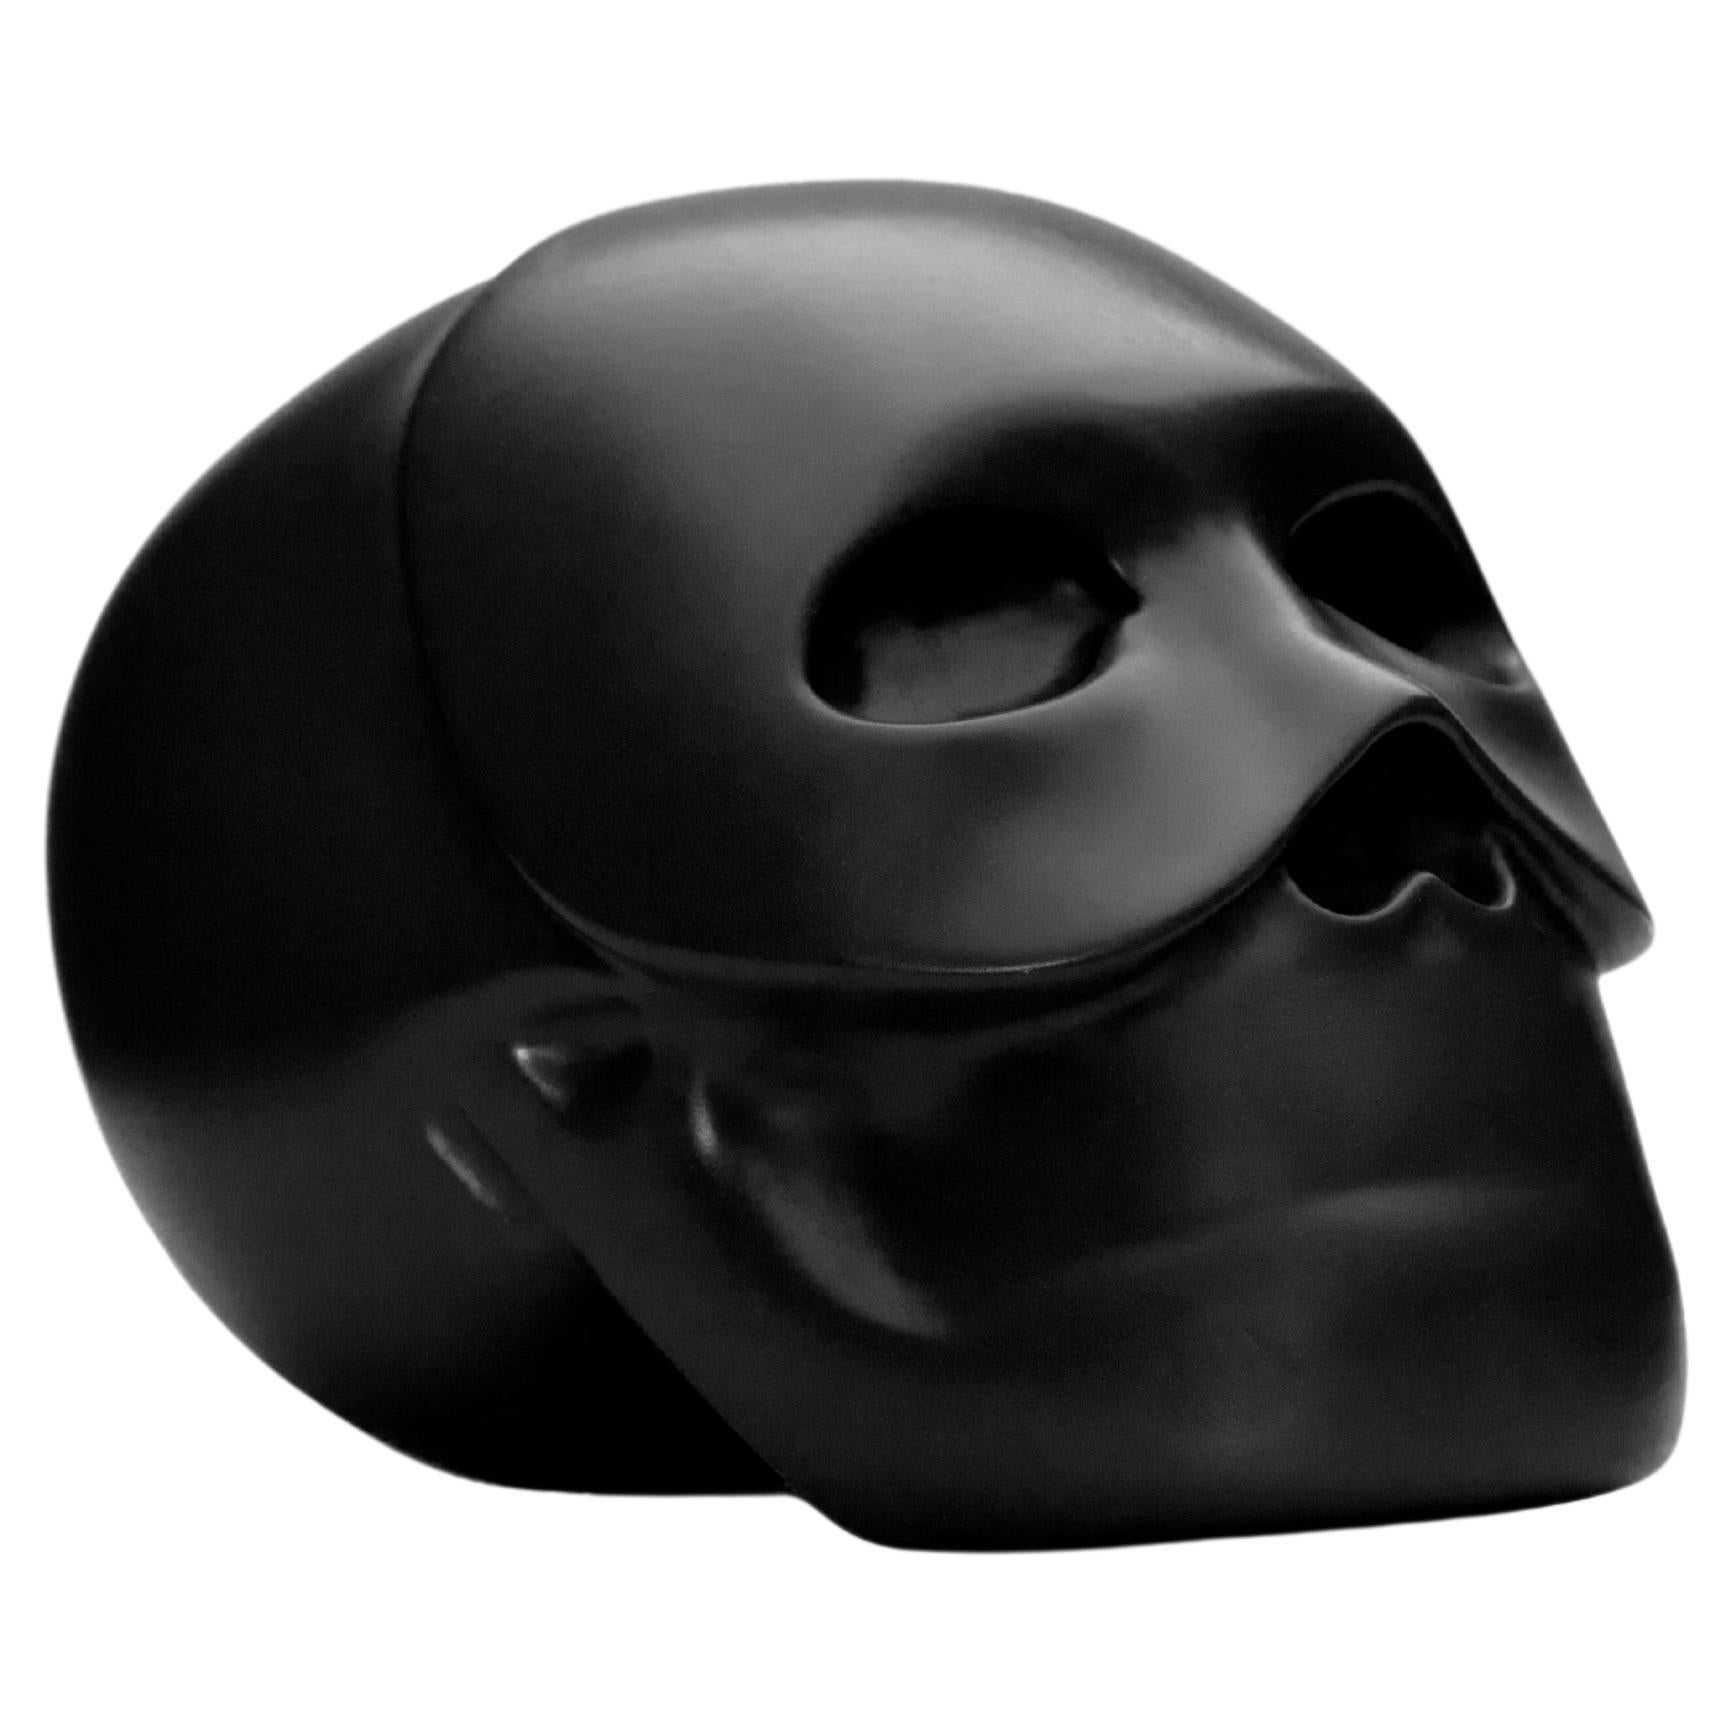 THE SKULL "Rough Suit"  hand-painted resin sculpture by Gio Pagani For Sale